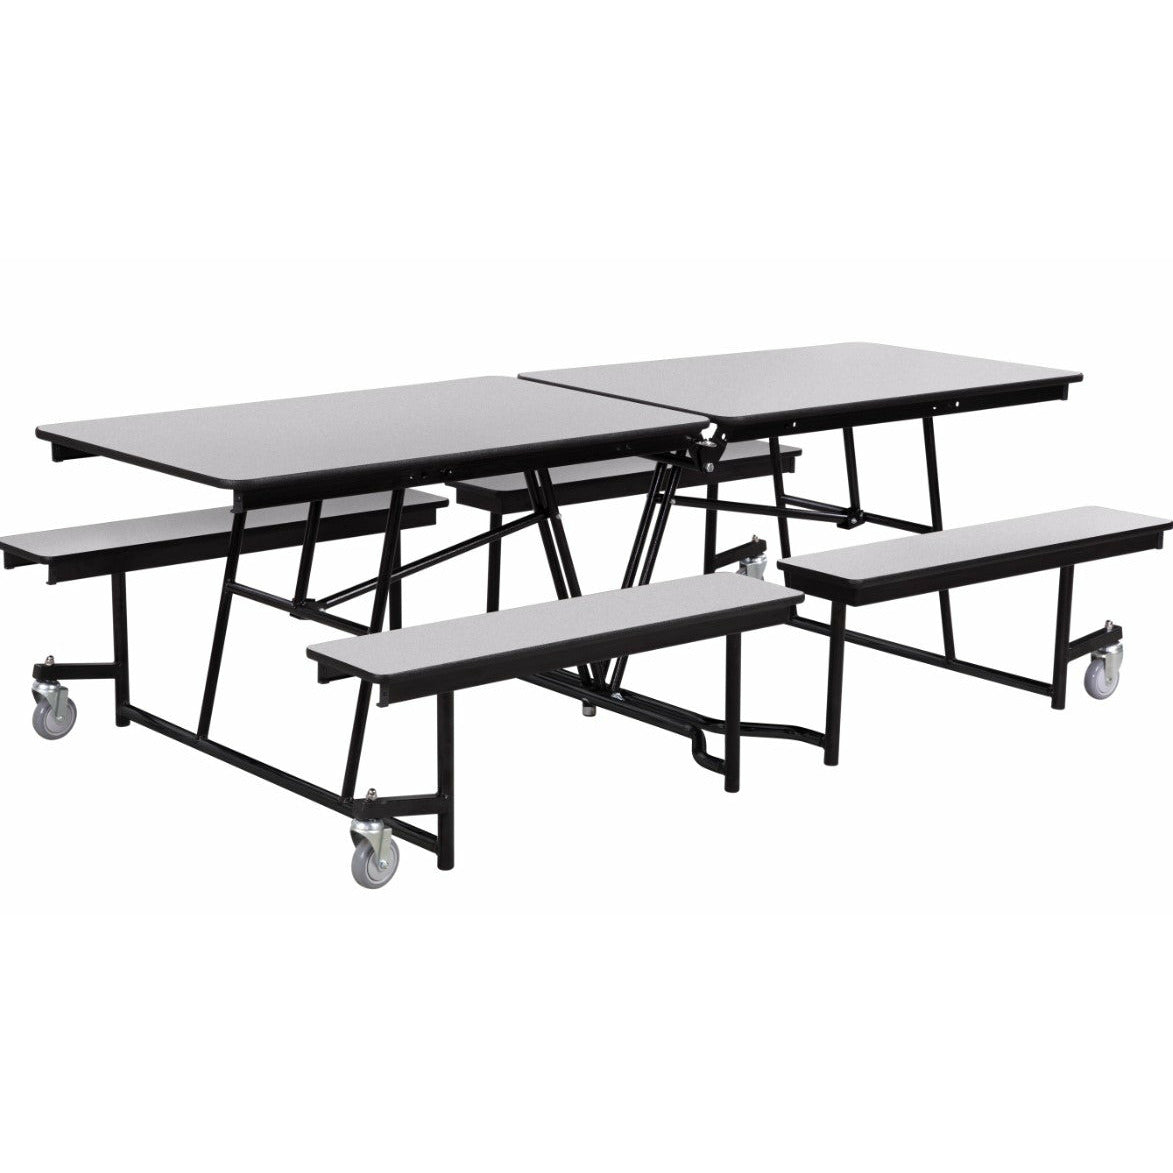 8' Rectangle Mobile Table with Bench - Plywood Core - Black ProtectEdge - Black Powder Coat Frame - Grey Glace Top - Grey Glace Bench